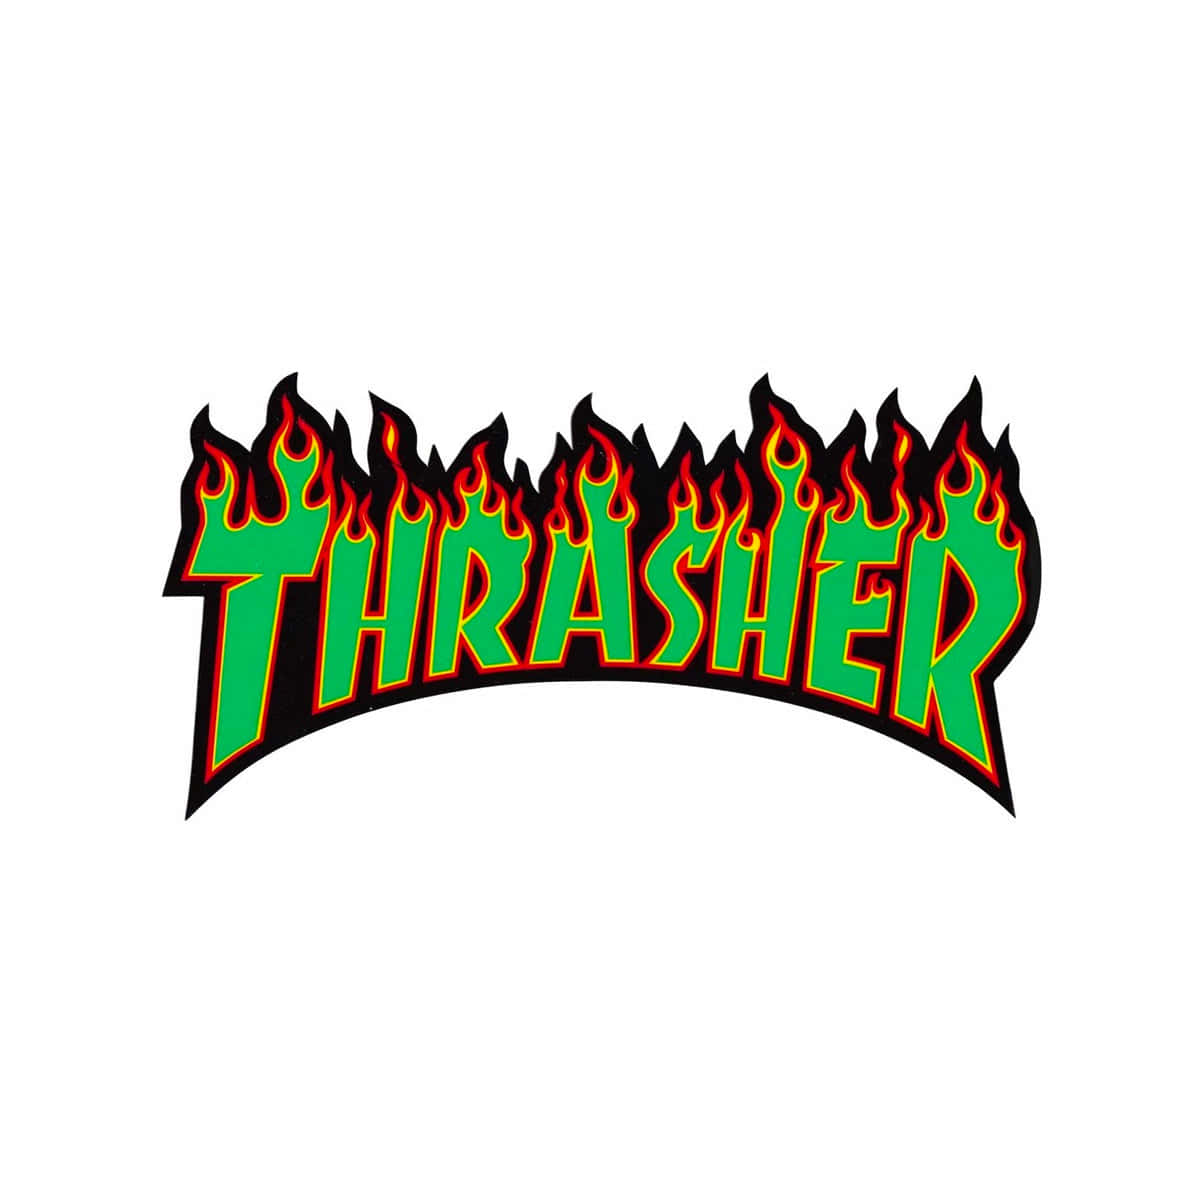 Thrasher Logo In Flames On A White Background